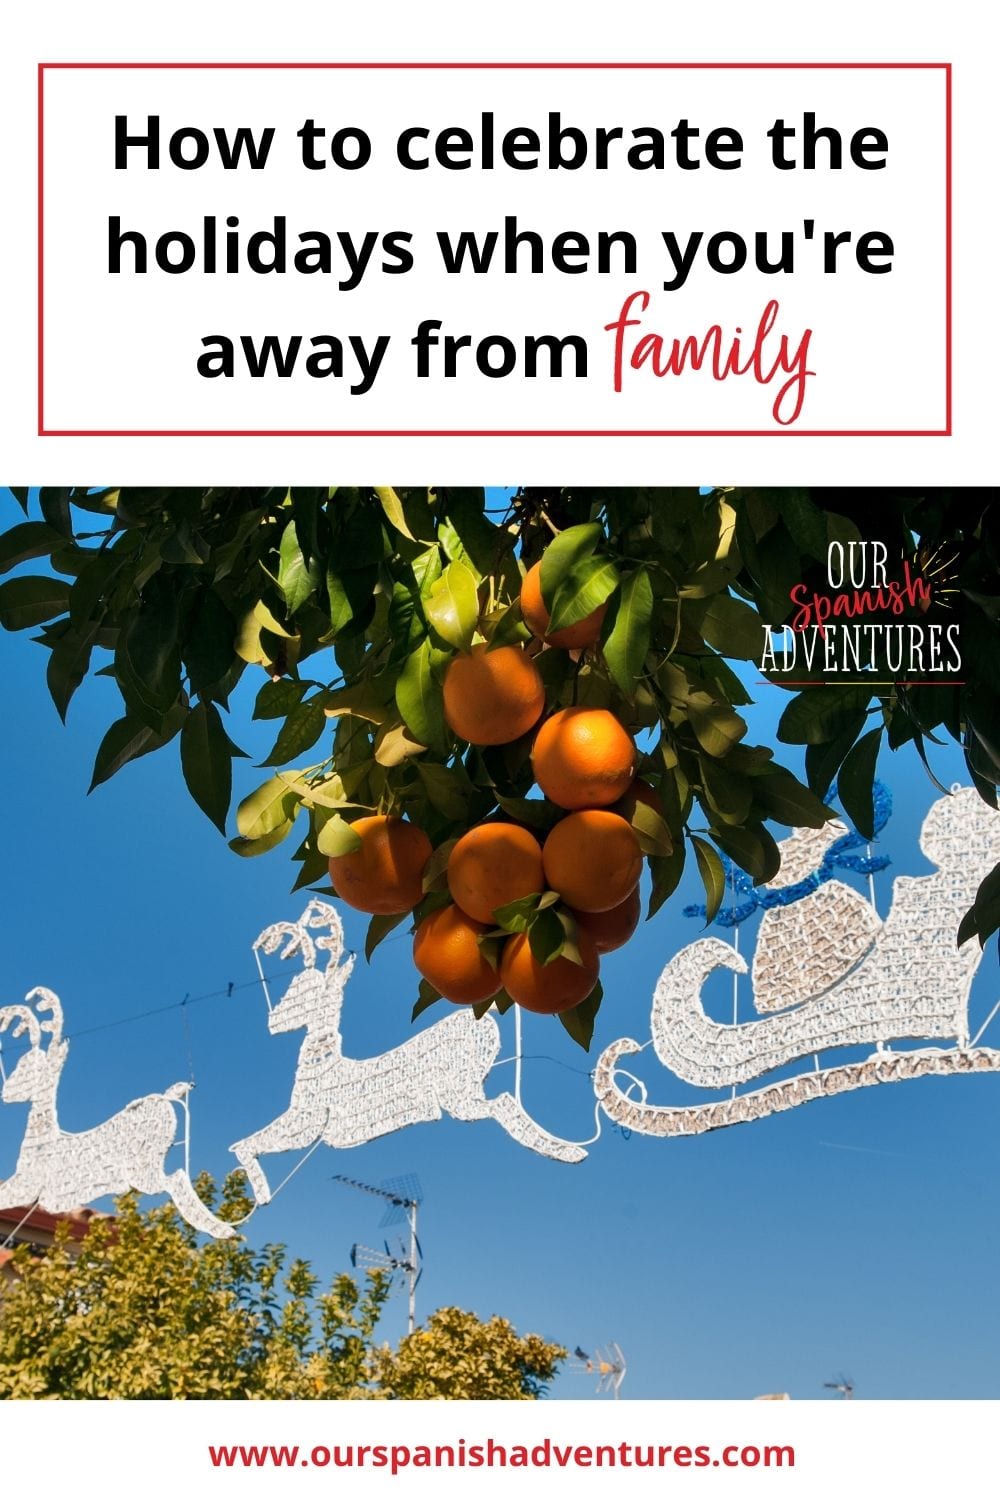 How to celebrate the holidays away from family | Our Spanish Adventures